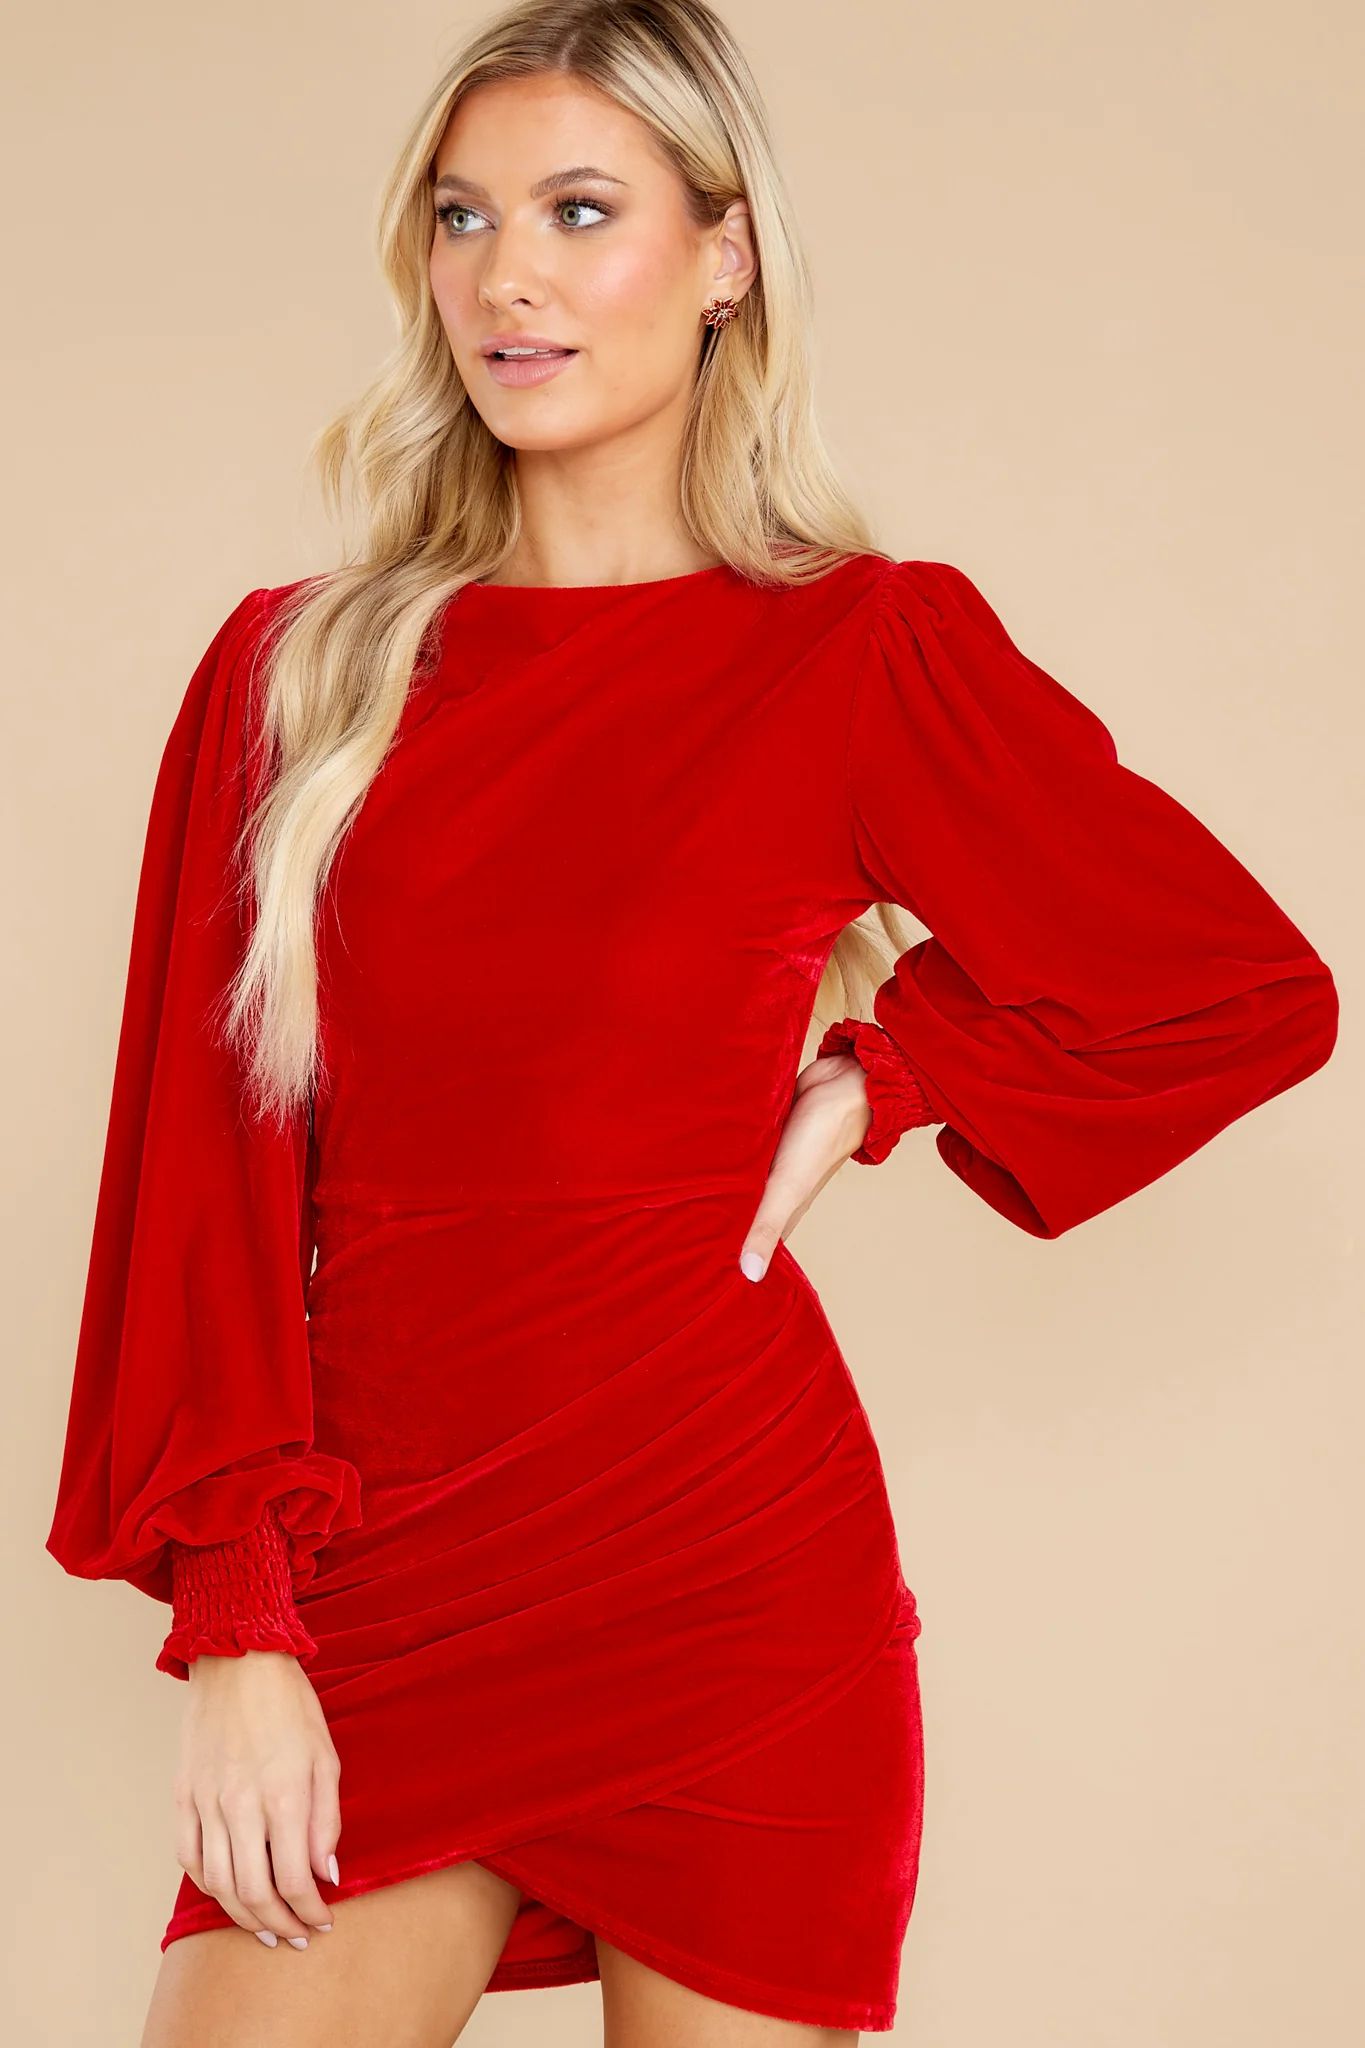 Sweet And Spicy Red Dress | Red Dress 